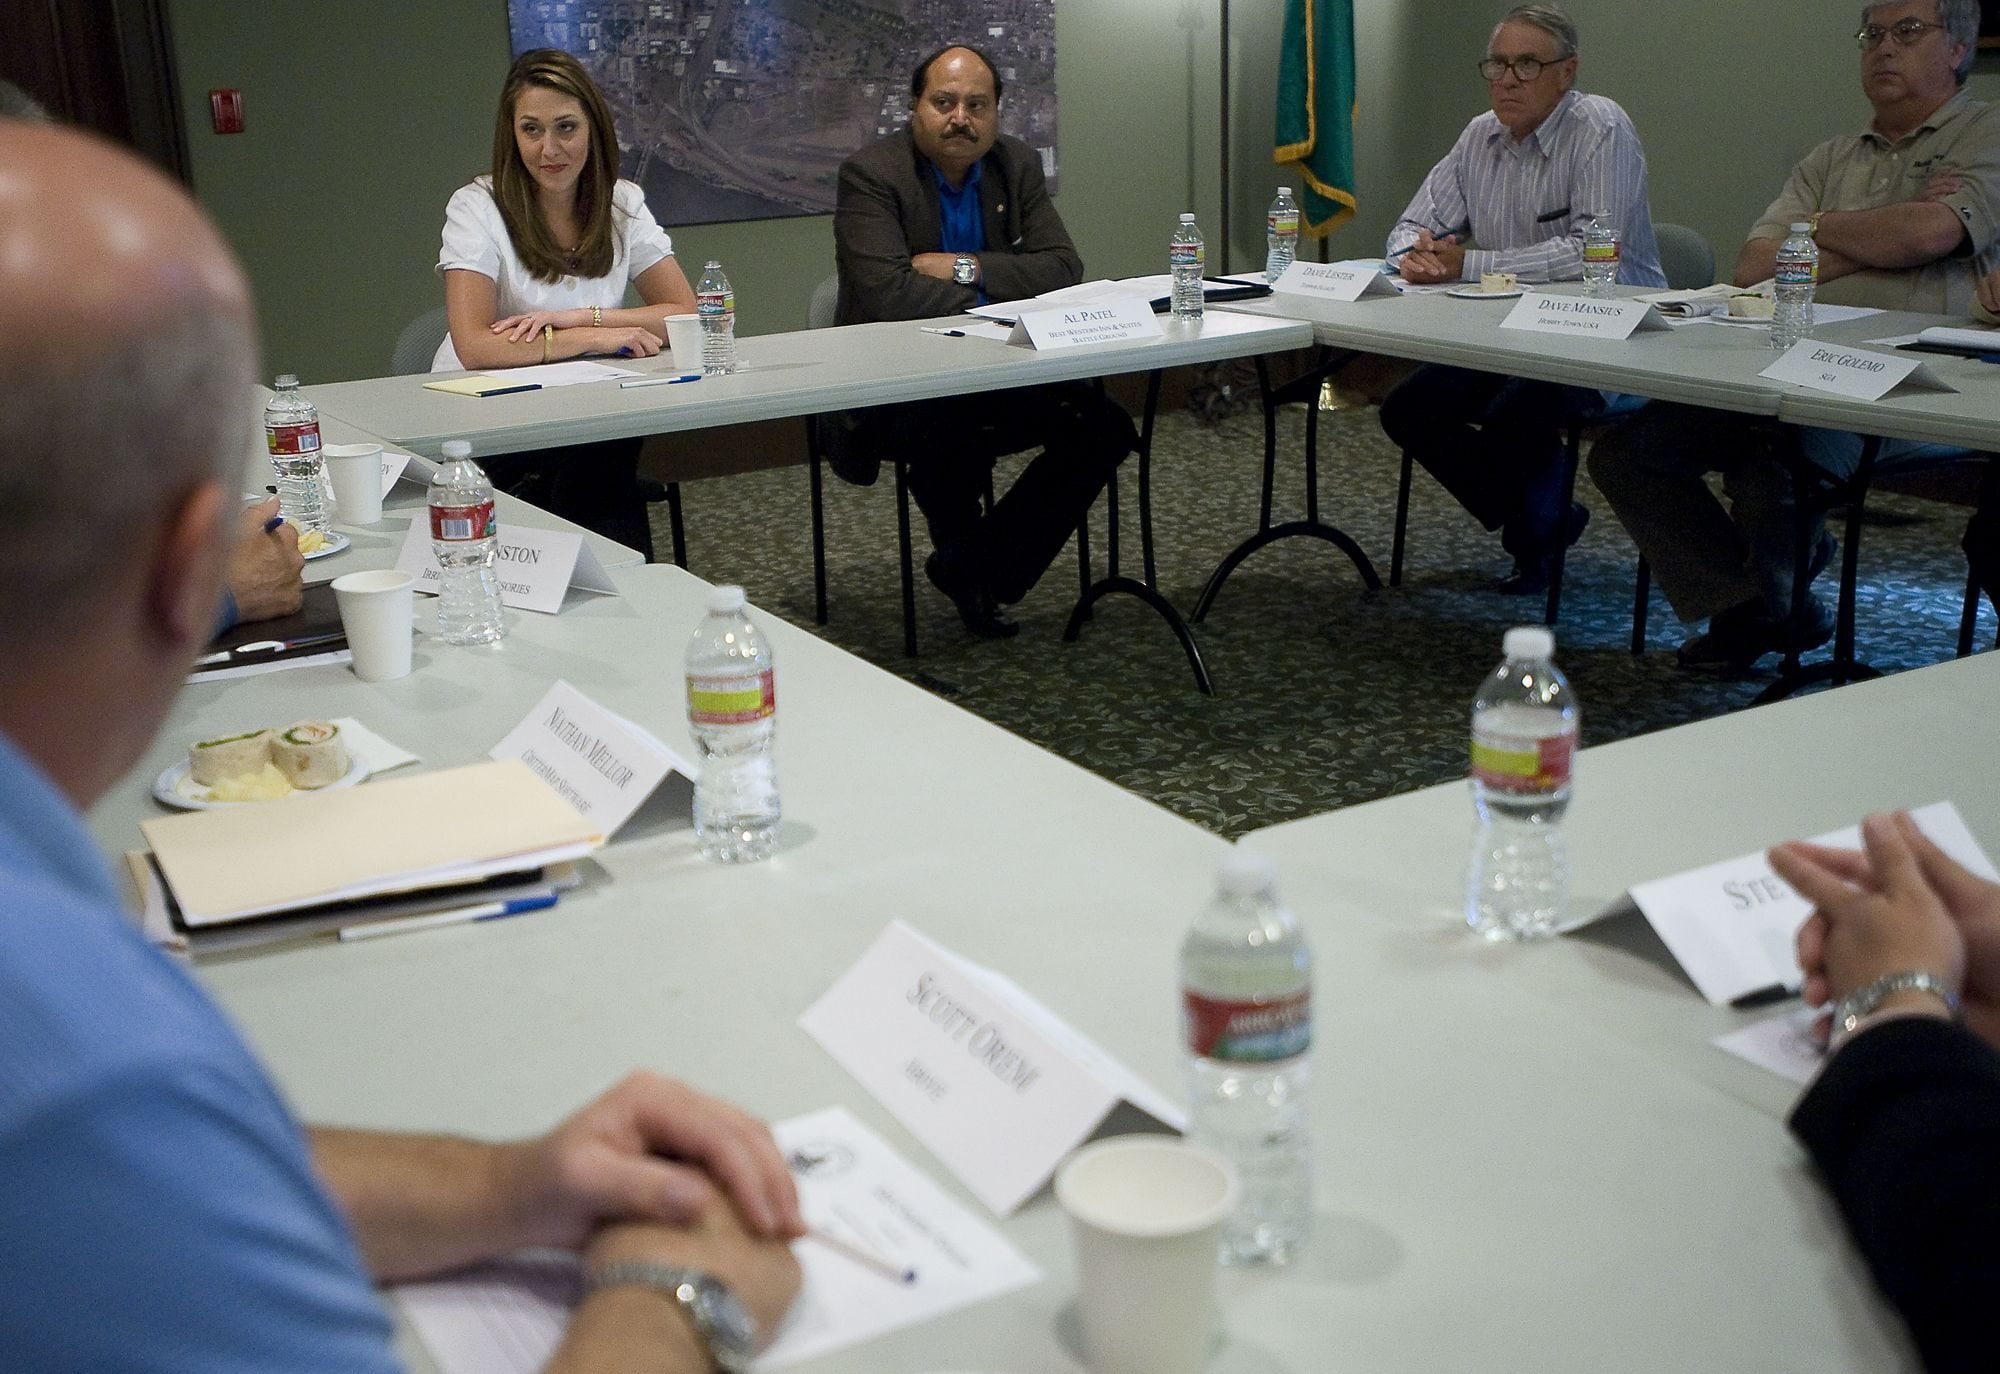 Rep. Jaime Herrera Beutler, left, invited a dozen Southwest Washington business leaders to talk about their concerns at Vancouver's O.O.